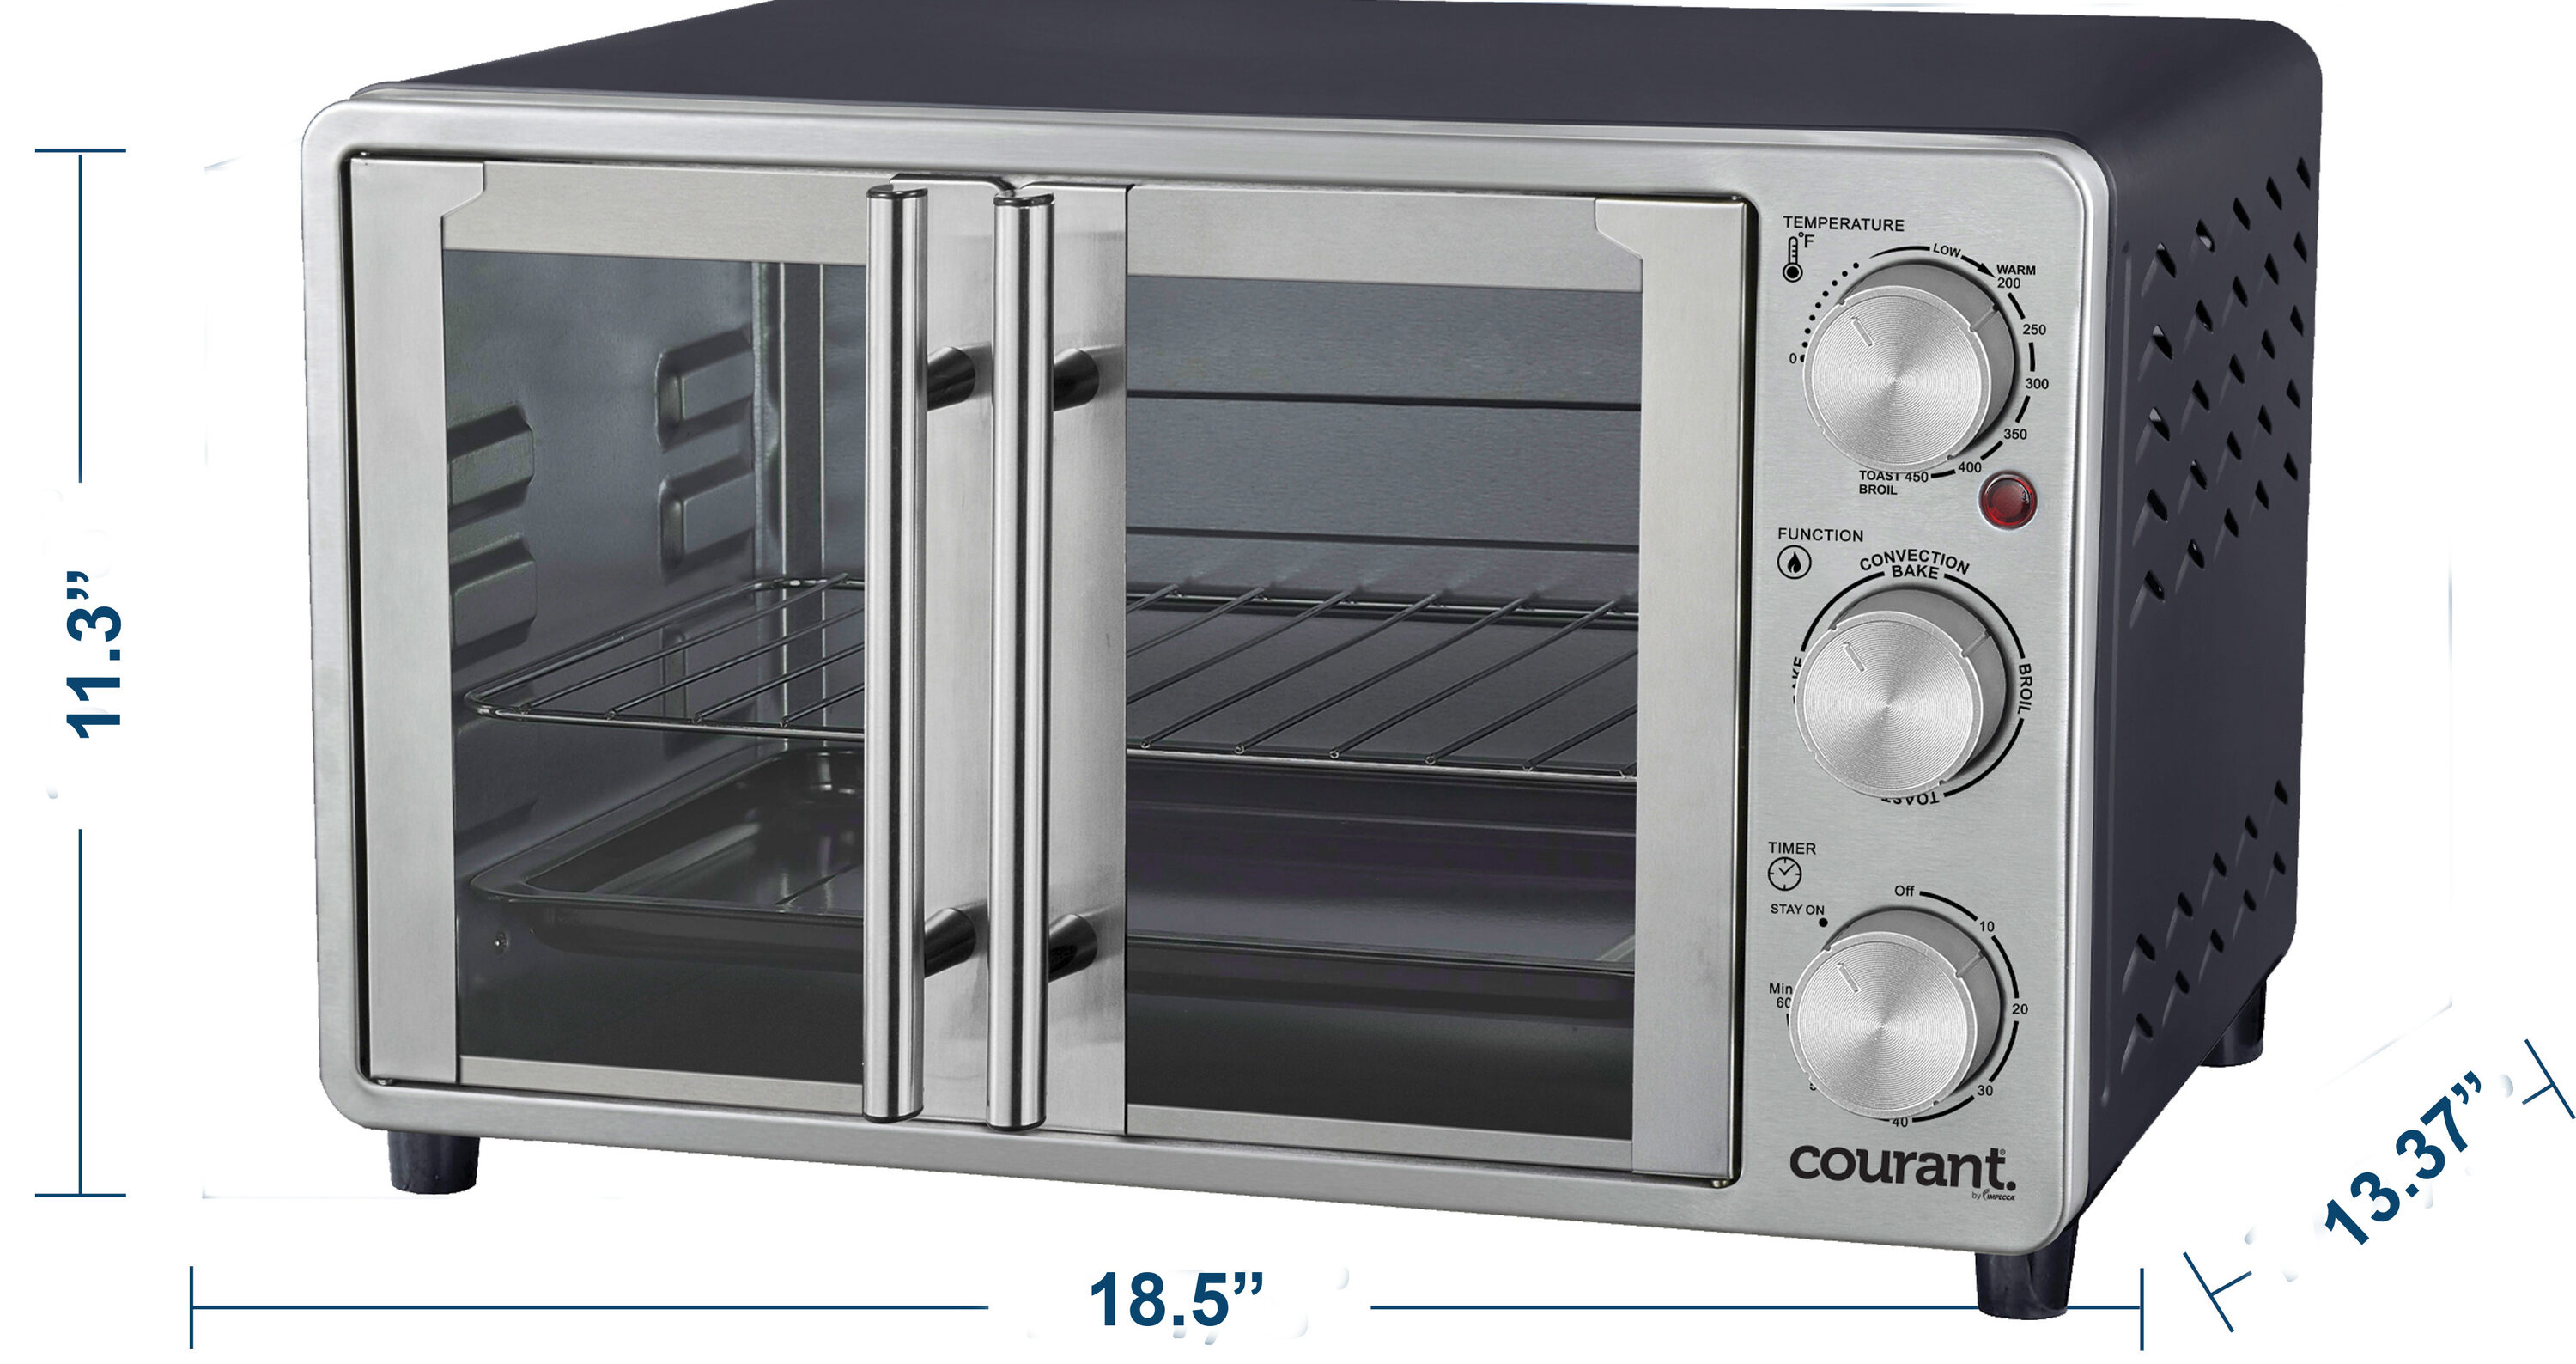 Black Convection Oven 6-Slice Or 9-Inch Pizza